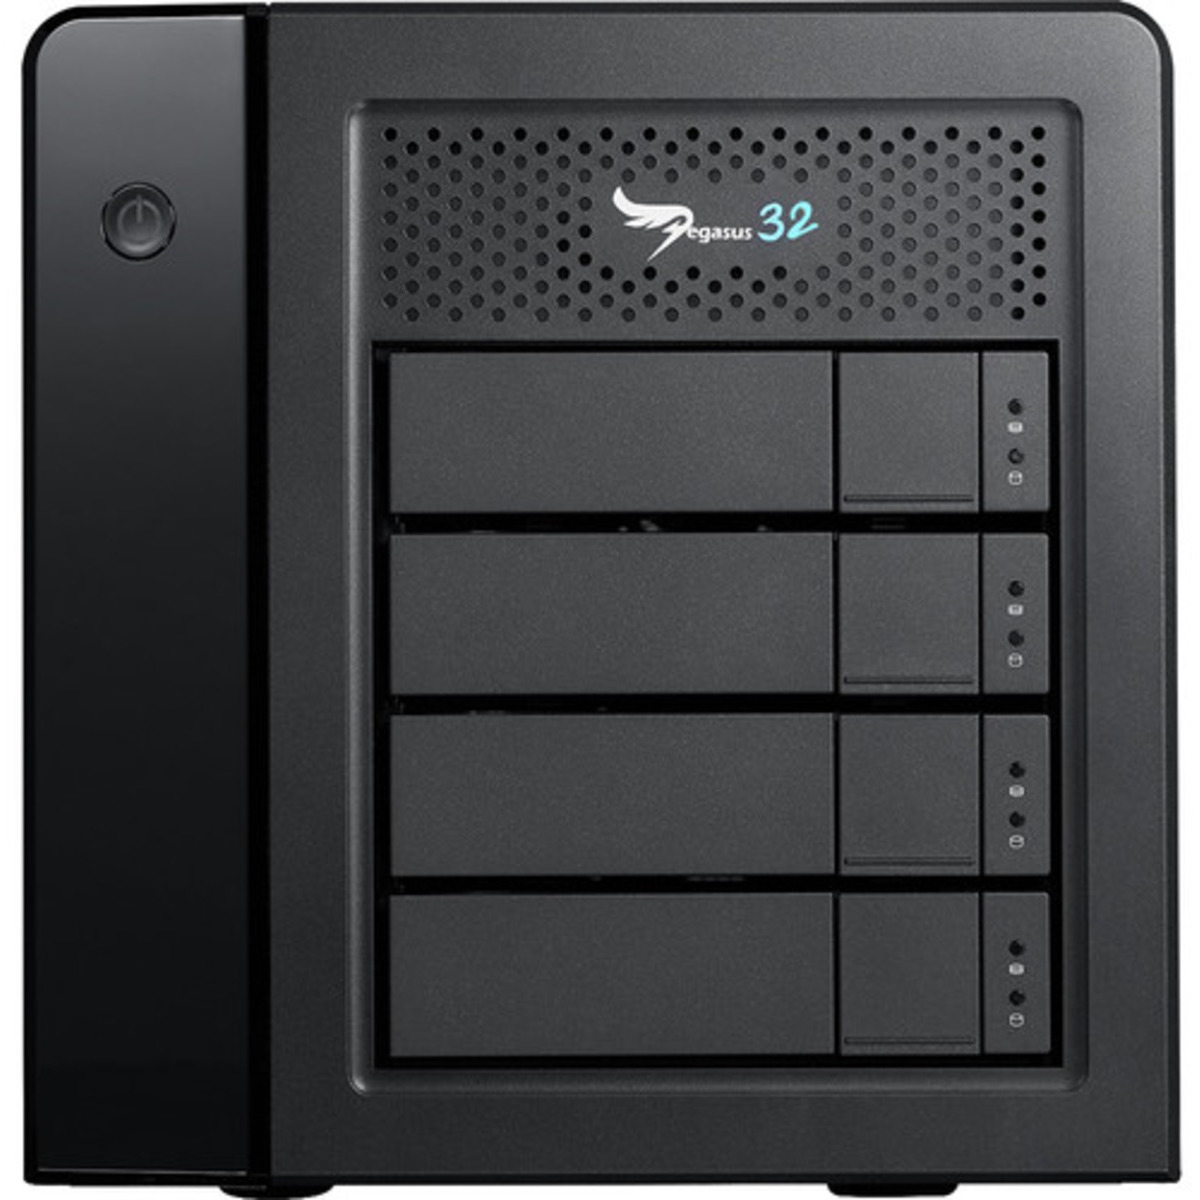 Promise Technology Pegasus32 R4 Thunderbolt 3 8tb 4-Bay Desktop Multimedia / Power User / Business DAS - Direct Attached Storage Device 4x2tb Sandisk Ultra 3D SDSSDH3-2T00 2.5 560/520MB/s SATA 6Gb/s SSD CONSUMER Class Drives Installed - Burn-In Tested Pegasus32 R4 Thunderbolt 3